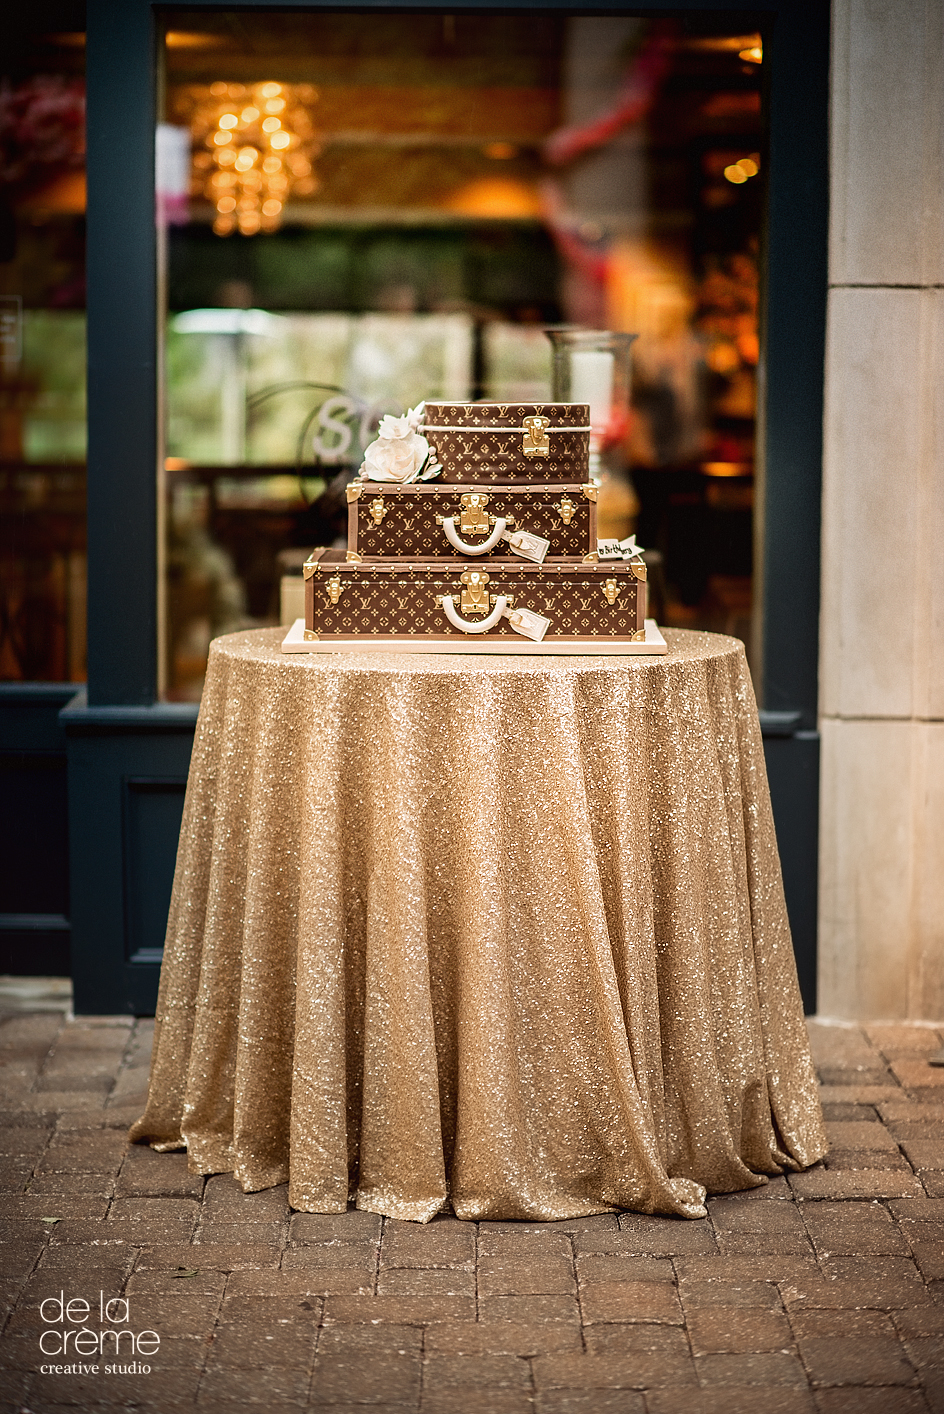 3-tier Louis Vuitton themed wedding cake covered in fondan…